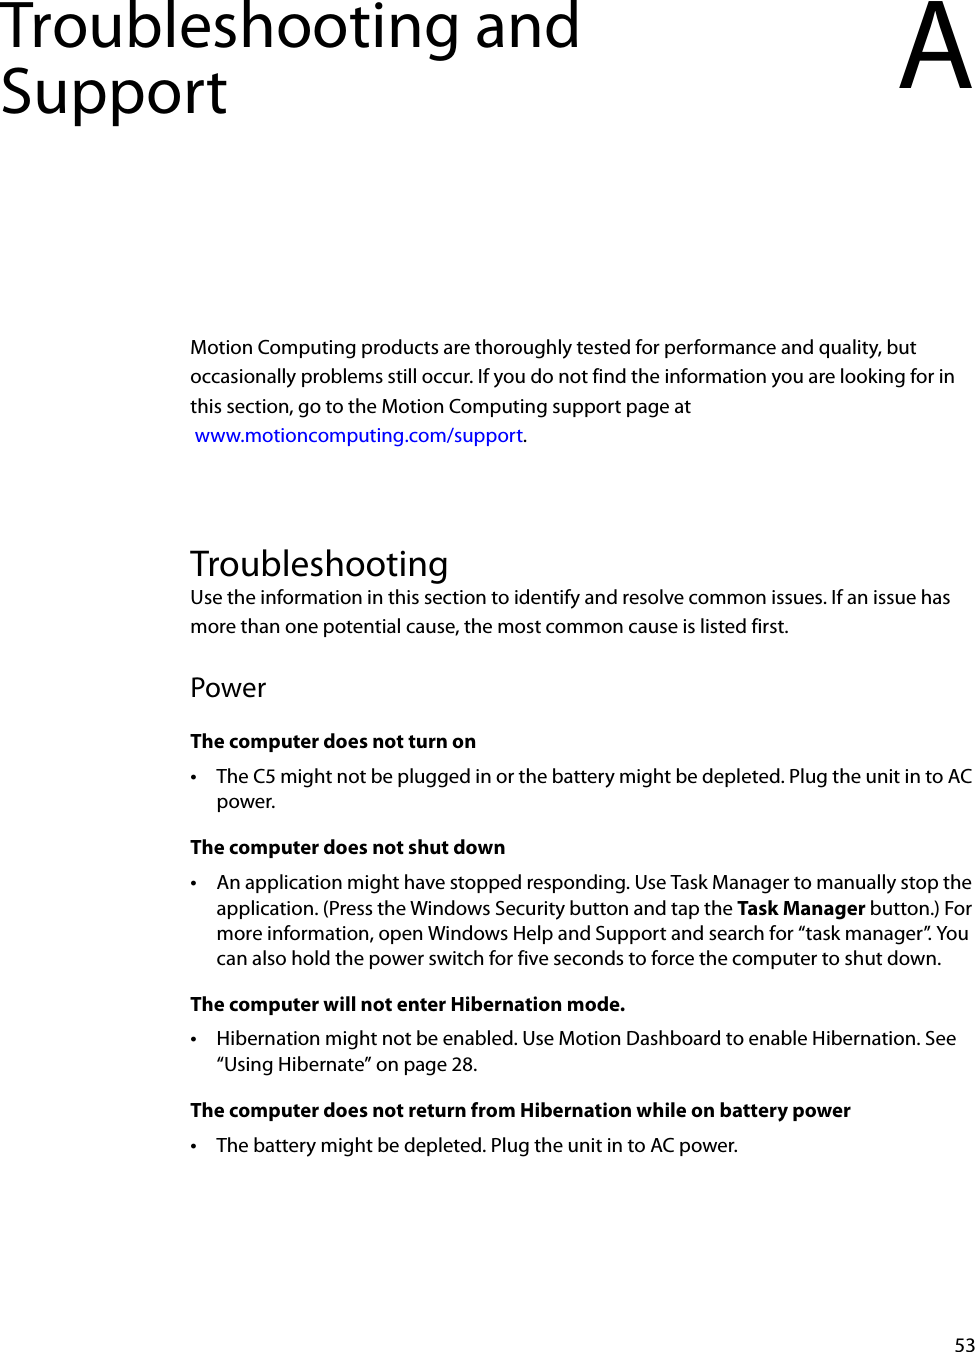 53Troubleshooting and Support AMotion Computing products are thoroughly tested for performance and quality, but occasionally problems still occur. If you do not find the information you are looking for in this section, go to the Motion Computing support page at www.motioncomputing.com/support.TroubleshootingUse the information in this section to identify and resolve common issues. If an issue has more than one potential cause, the most common cause is listed first.PowerThe computer does not turn on•The C5 might not be plugged in or the battery might be depleted. Plug the unit in to AC power.The computer does not shut down•An application might have stopped responding. Use Task Manager to manually stop the application. (Press the Windows Security button and tap the Task Manager button.) For more information, open Windows Help and Support and search for “task manager”. You can also hold the power switch for five seconds to force the computer to shut down.The computer will not enter Hibernation mode.•Hibernation might not be enabled. Use Motion Dashboard to enable Hibernation. See “Using Hibernate” on page 28.The computer does not return from Hibernation while on battery power•The battery might be depleted. Plug the unit in to AC power.